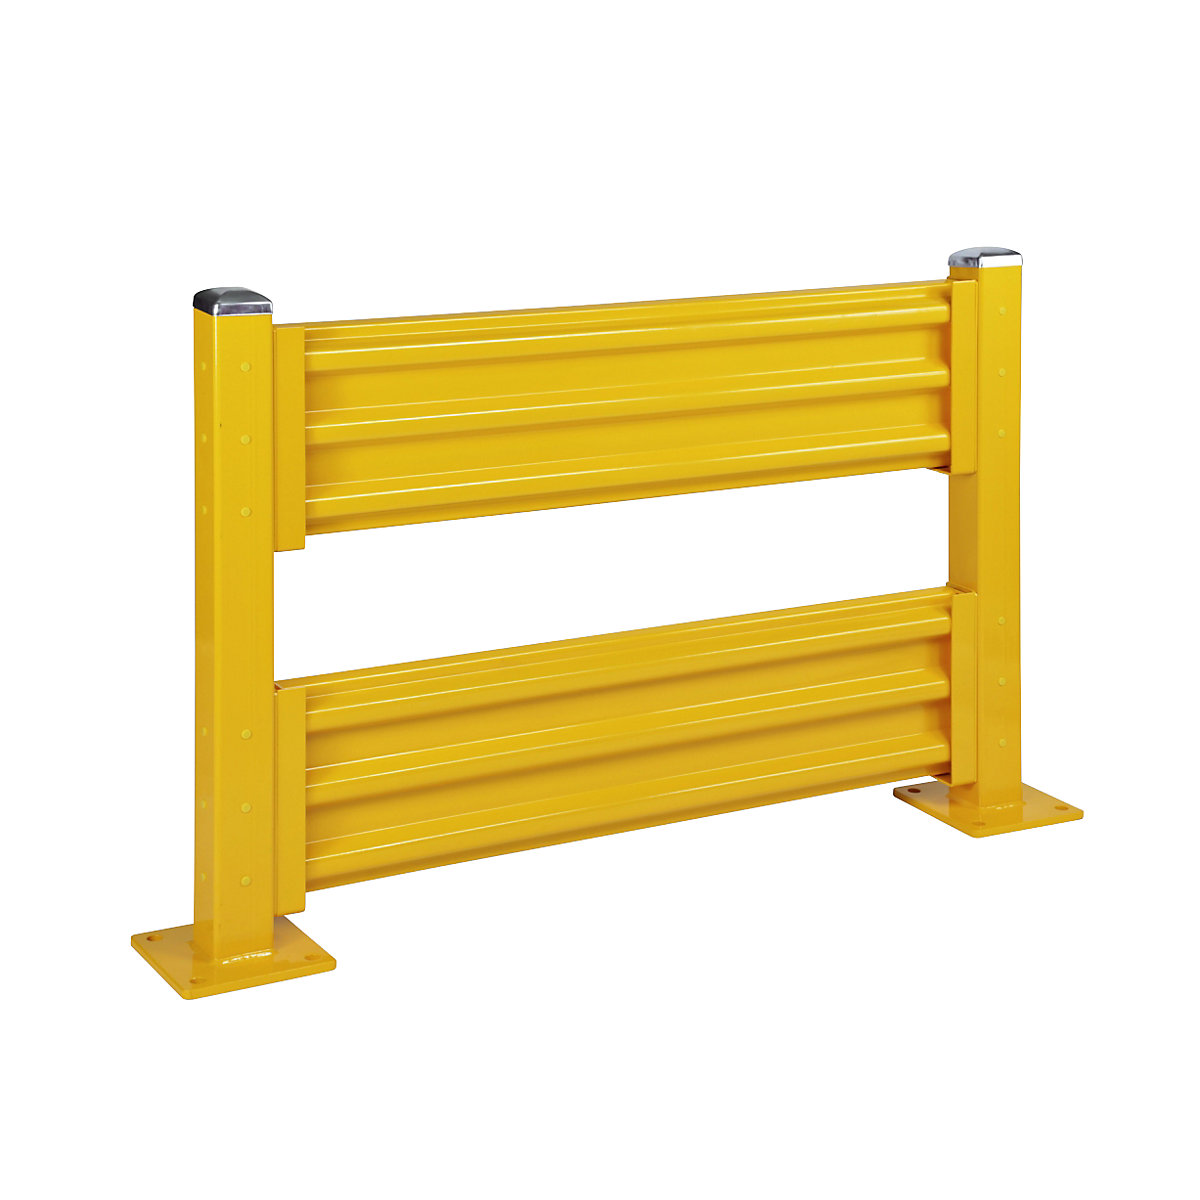 Crash protection wall, height 1090 mm, 2 wall sections, length 1372 mm, standard section incl. 2 posts-4